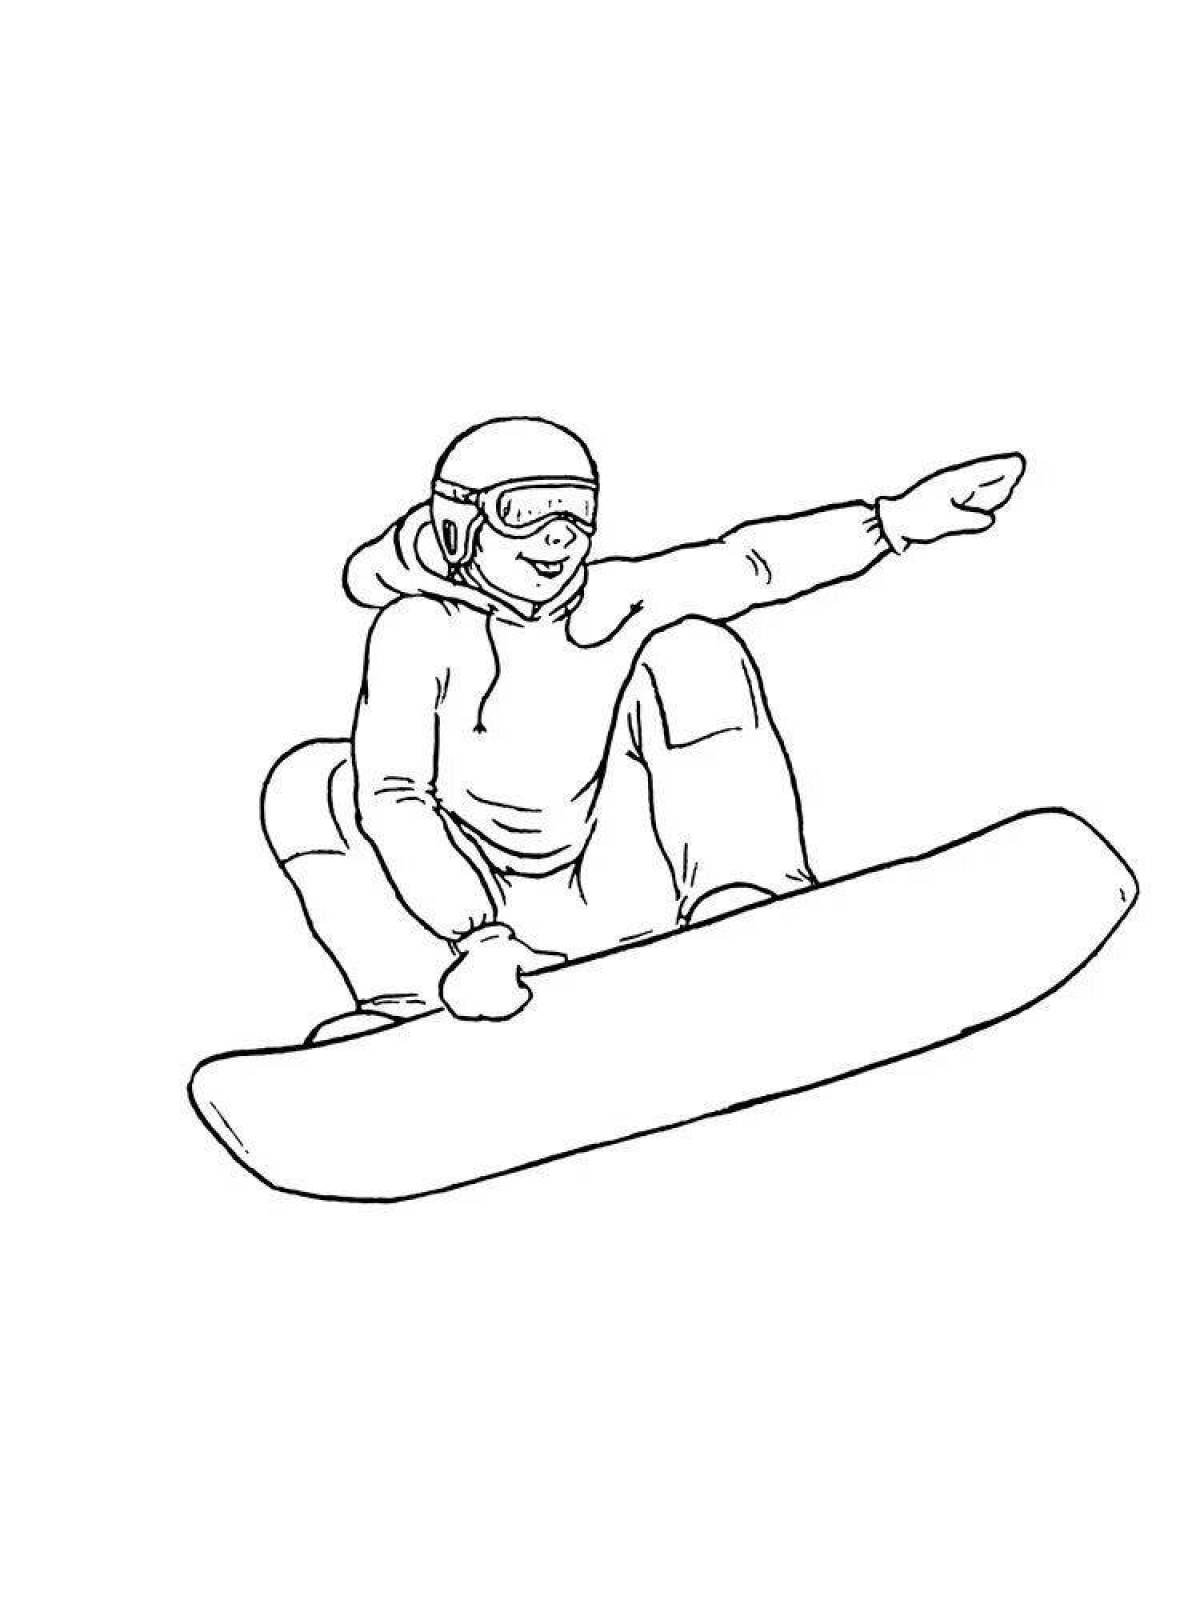 Coloring page cheerful snowboarder